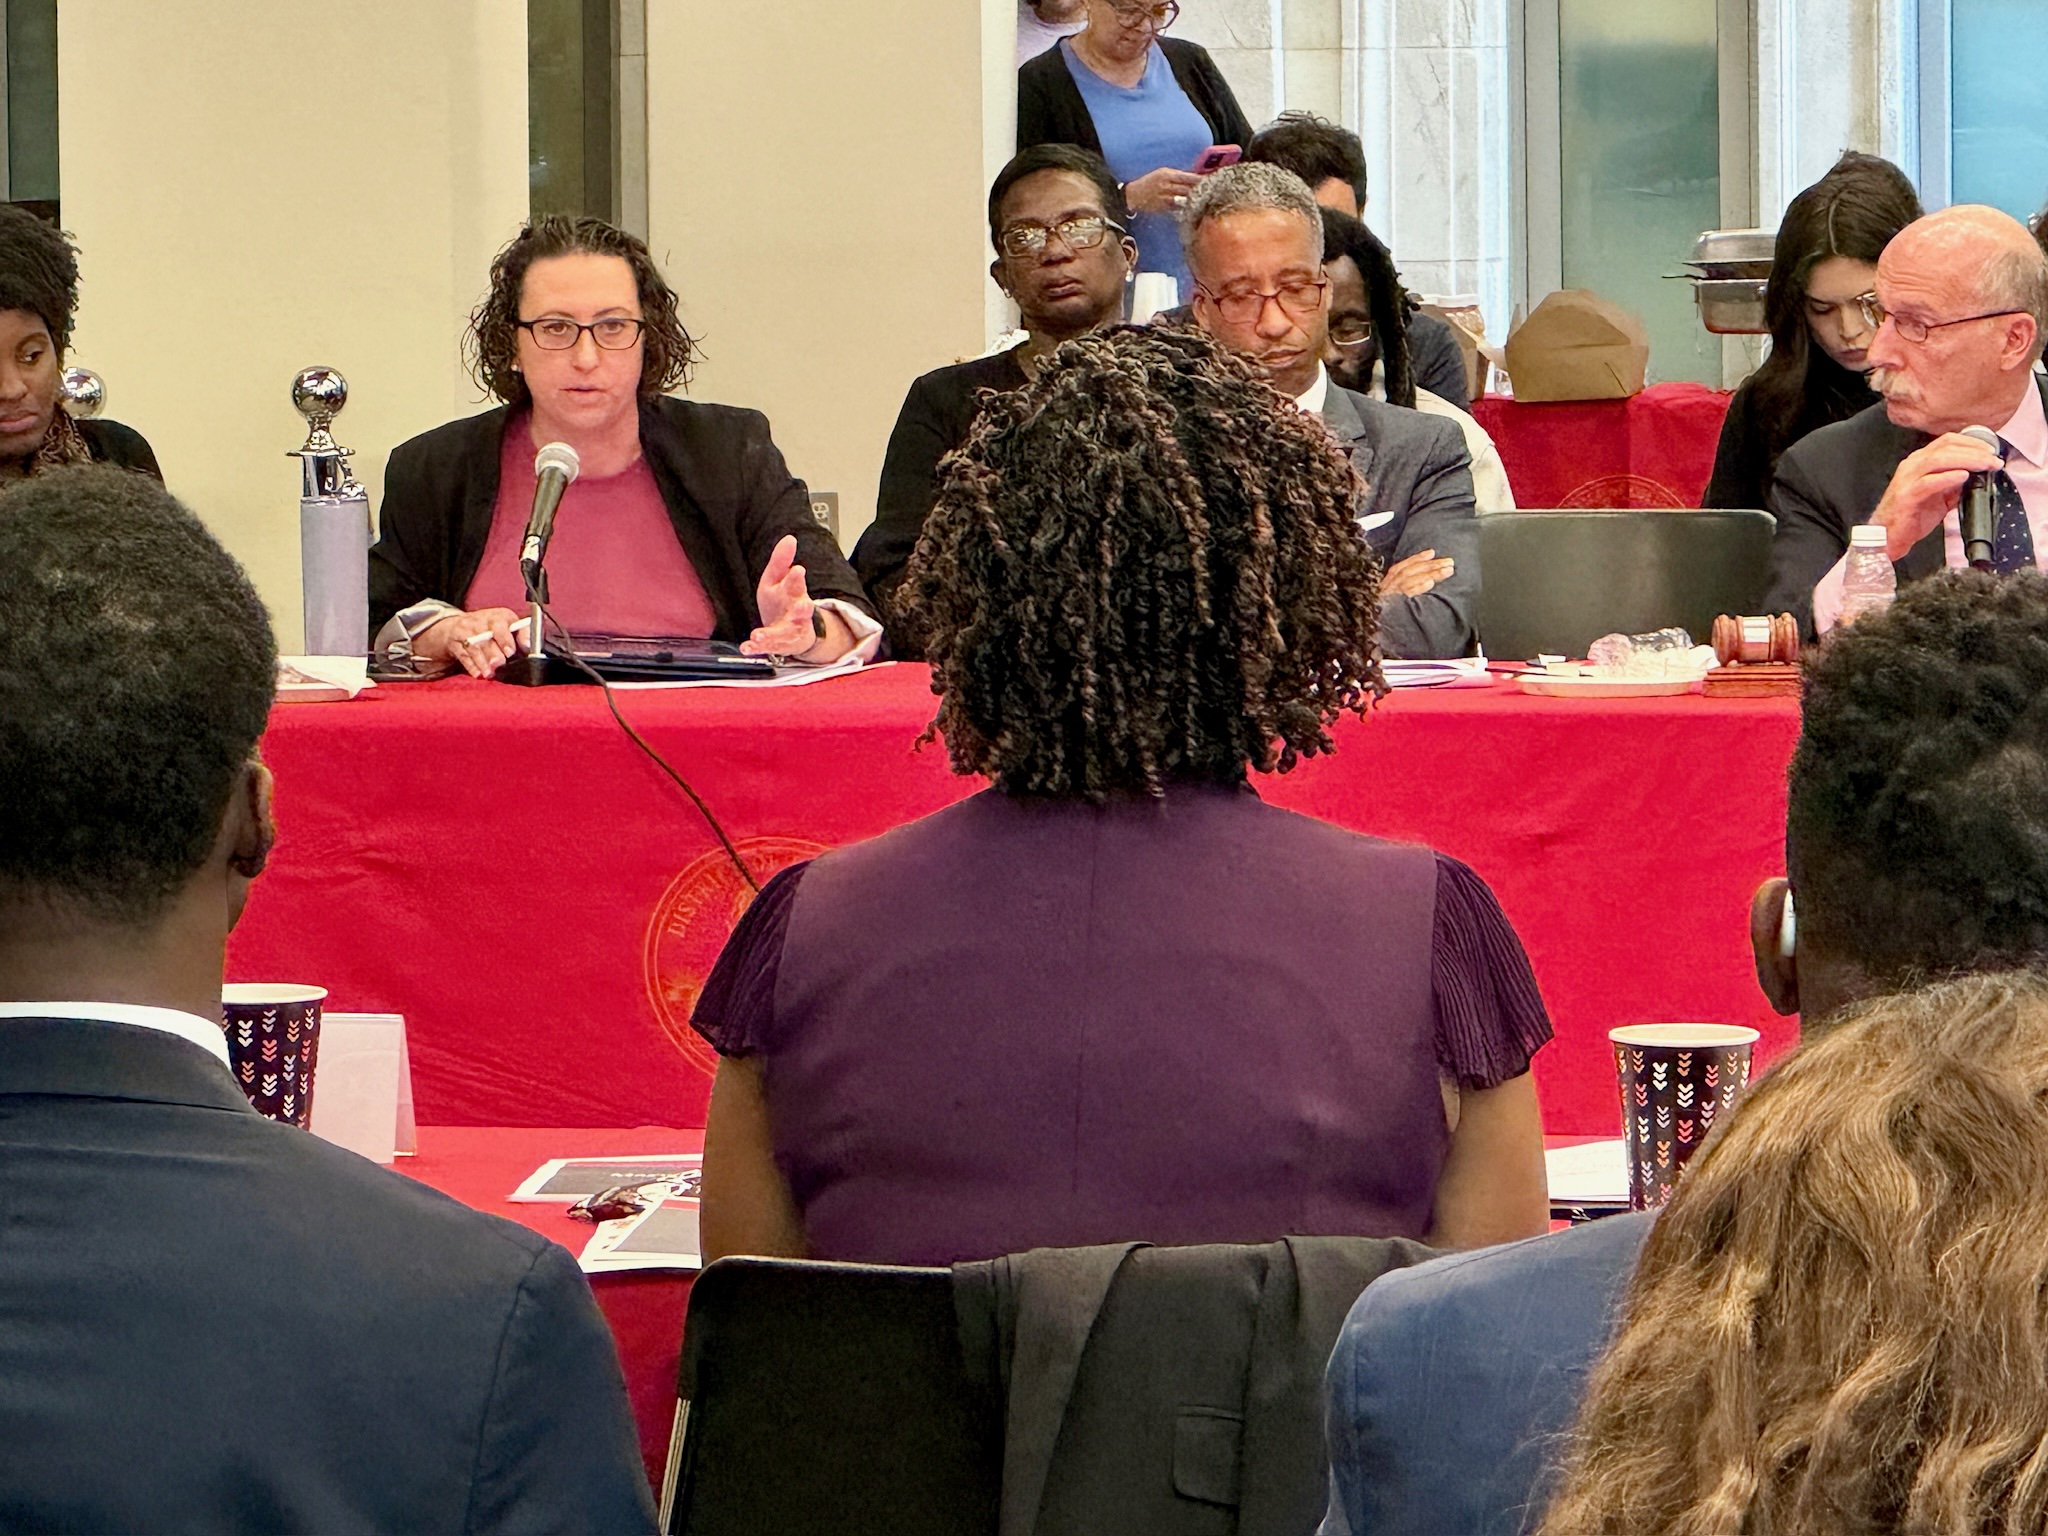 Councilmember Nadeau, facing the camera, is seated at a table with red tablecloth, speaking into a microphone, with councilmembers seated at either side. In the foreground is the back of Mayor Bowser's head, as she is facing Councilmember Nadeau across from her.